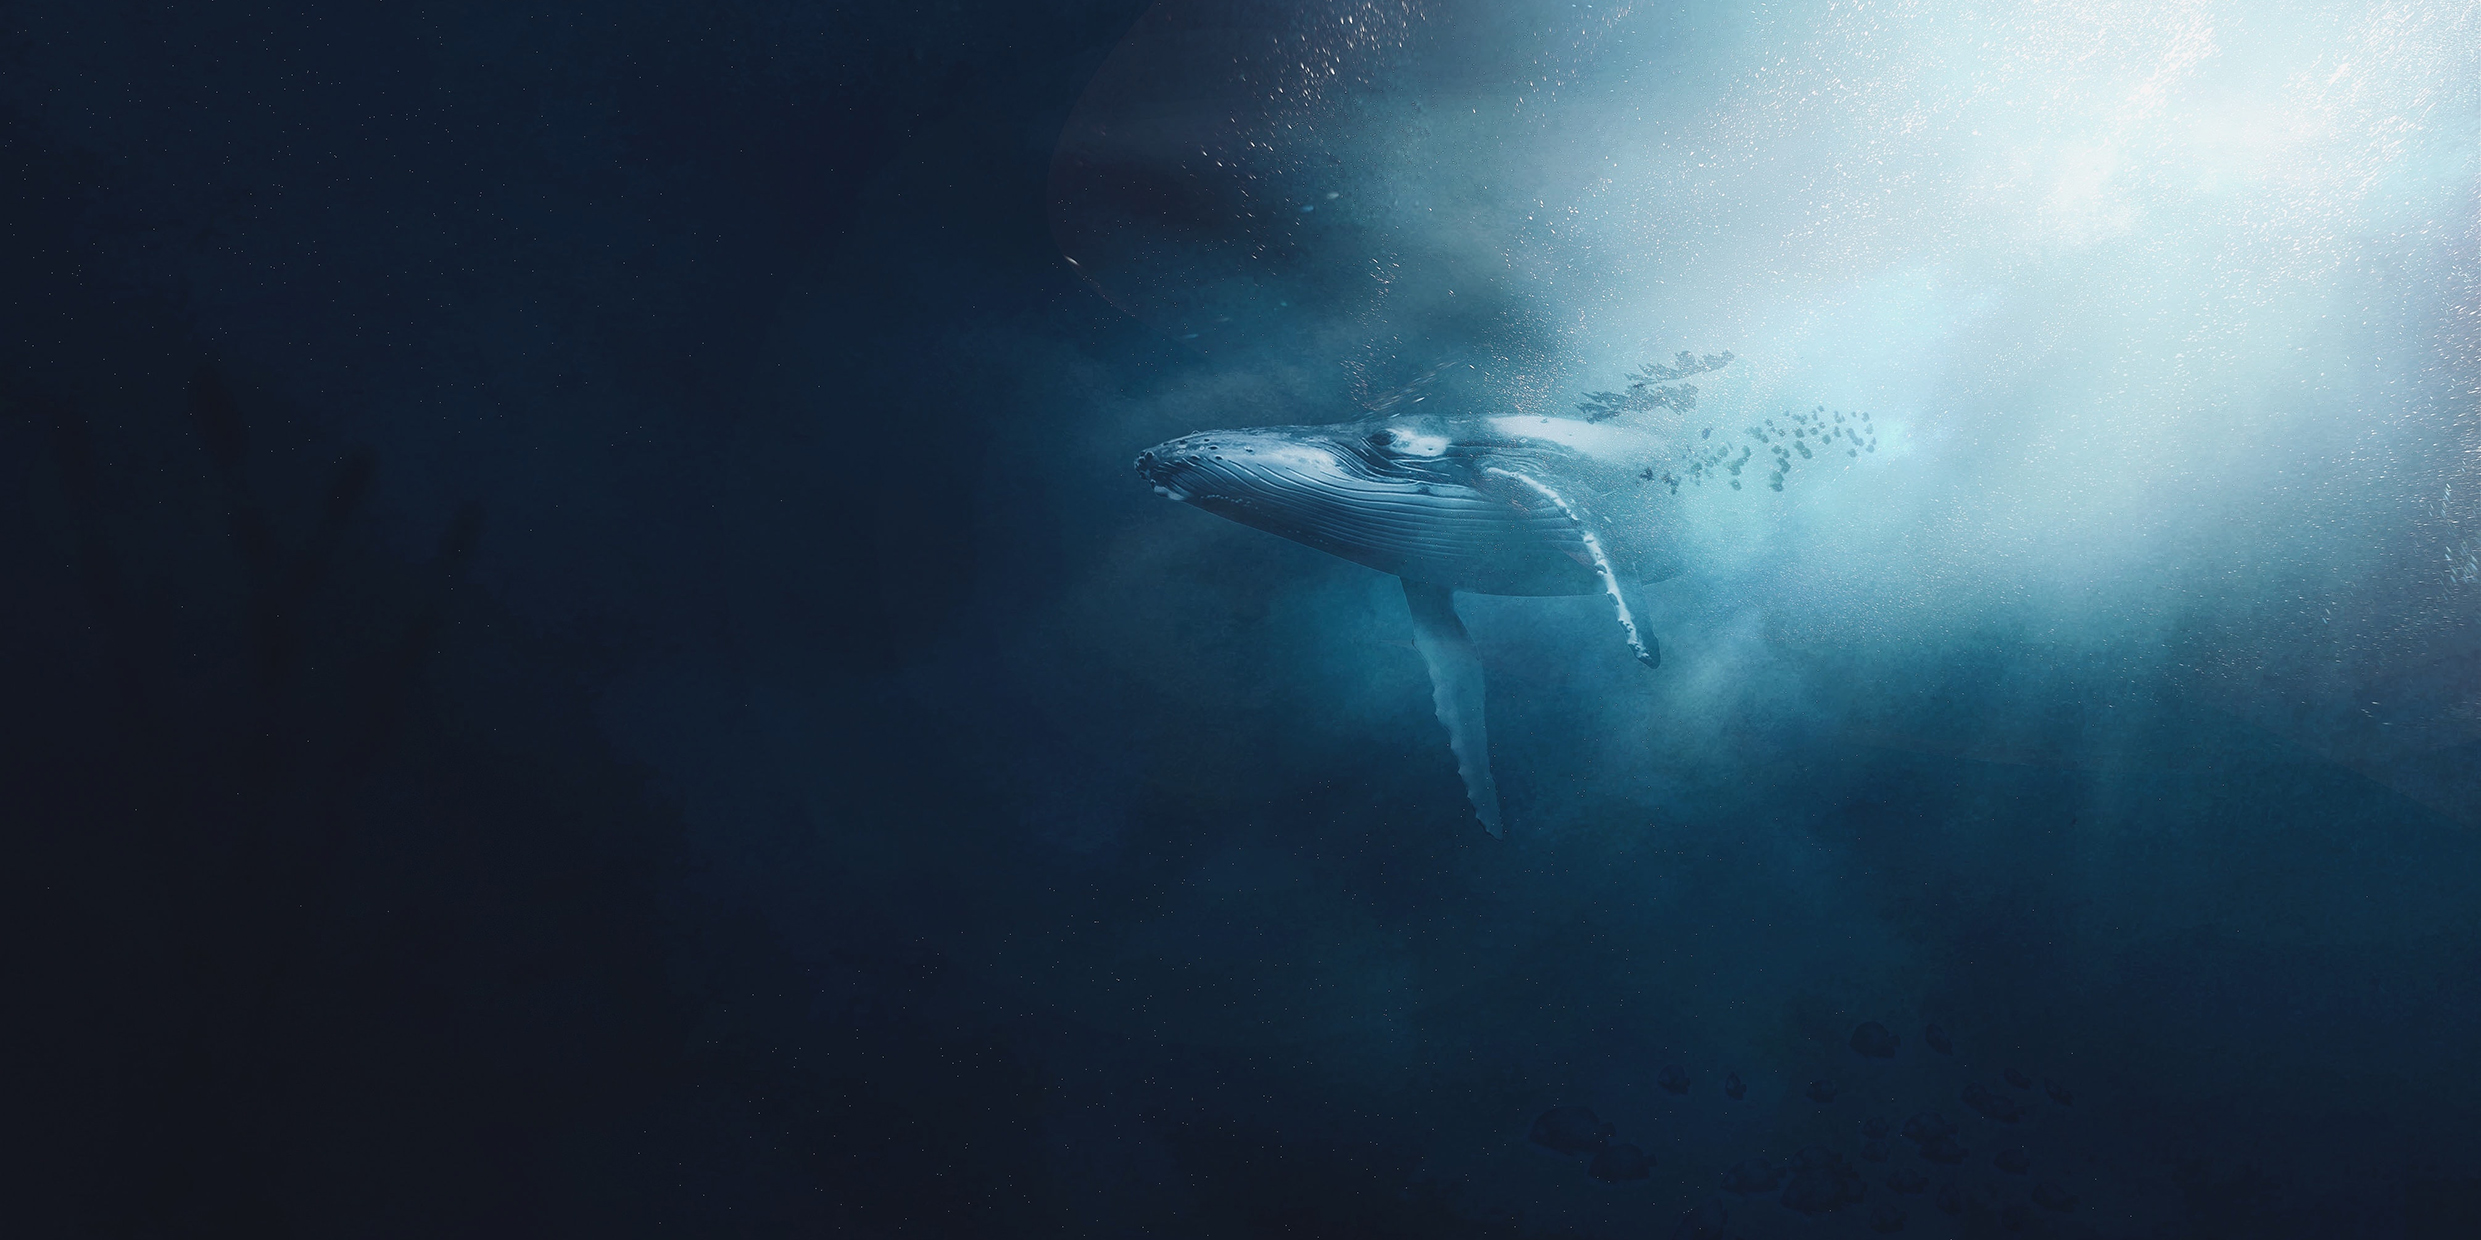 Image of a whale submerged in deep blue water